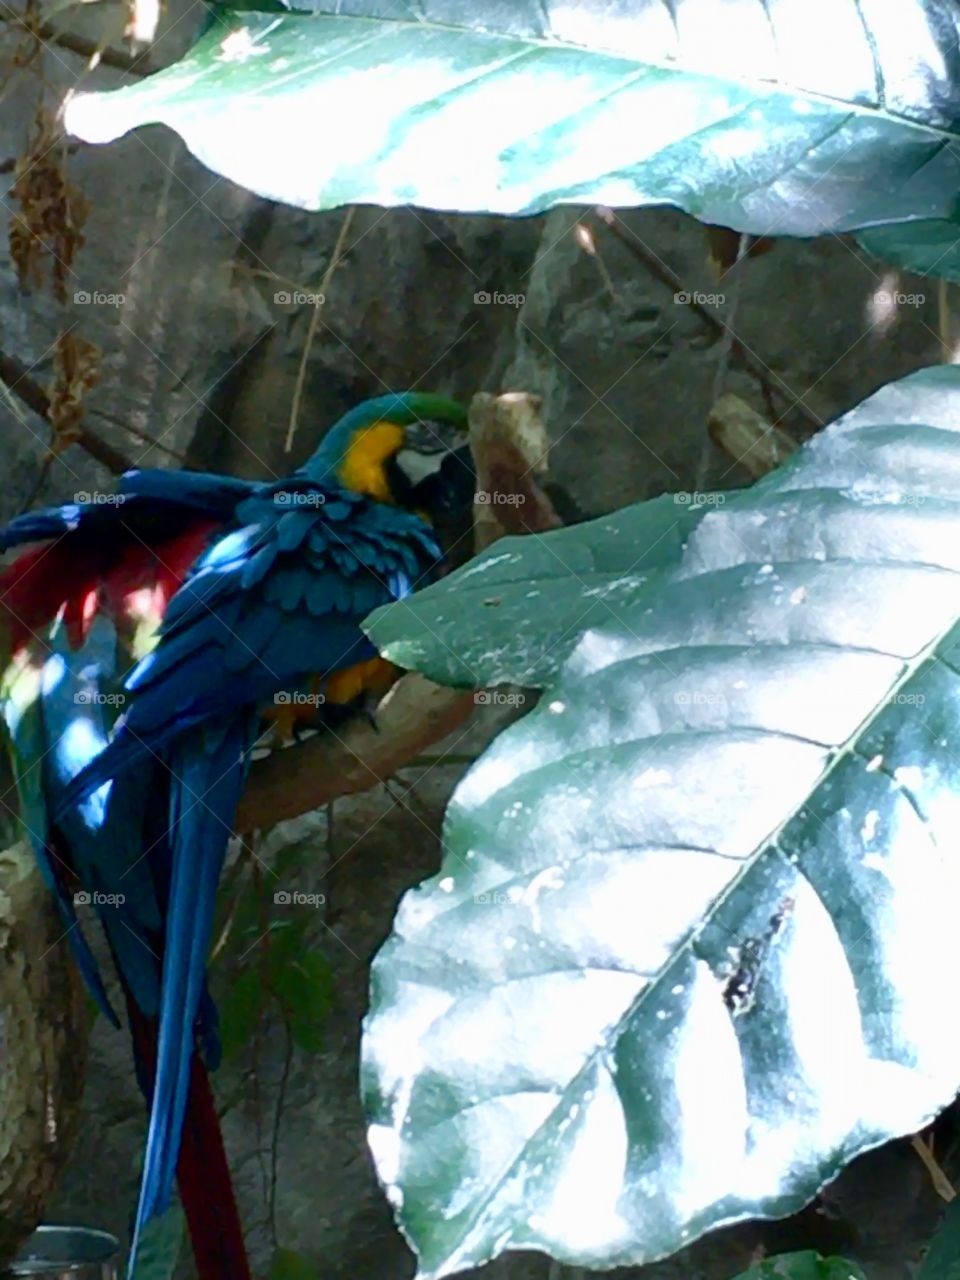 A zoo picture of the macaw